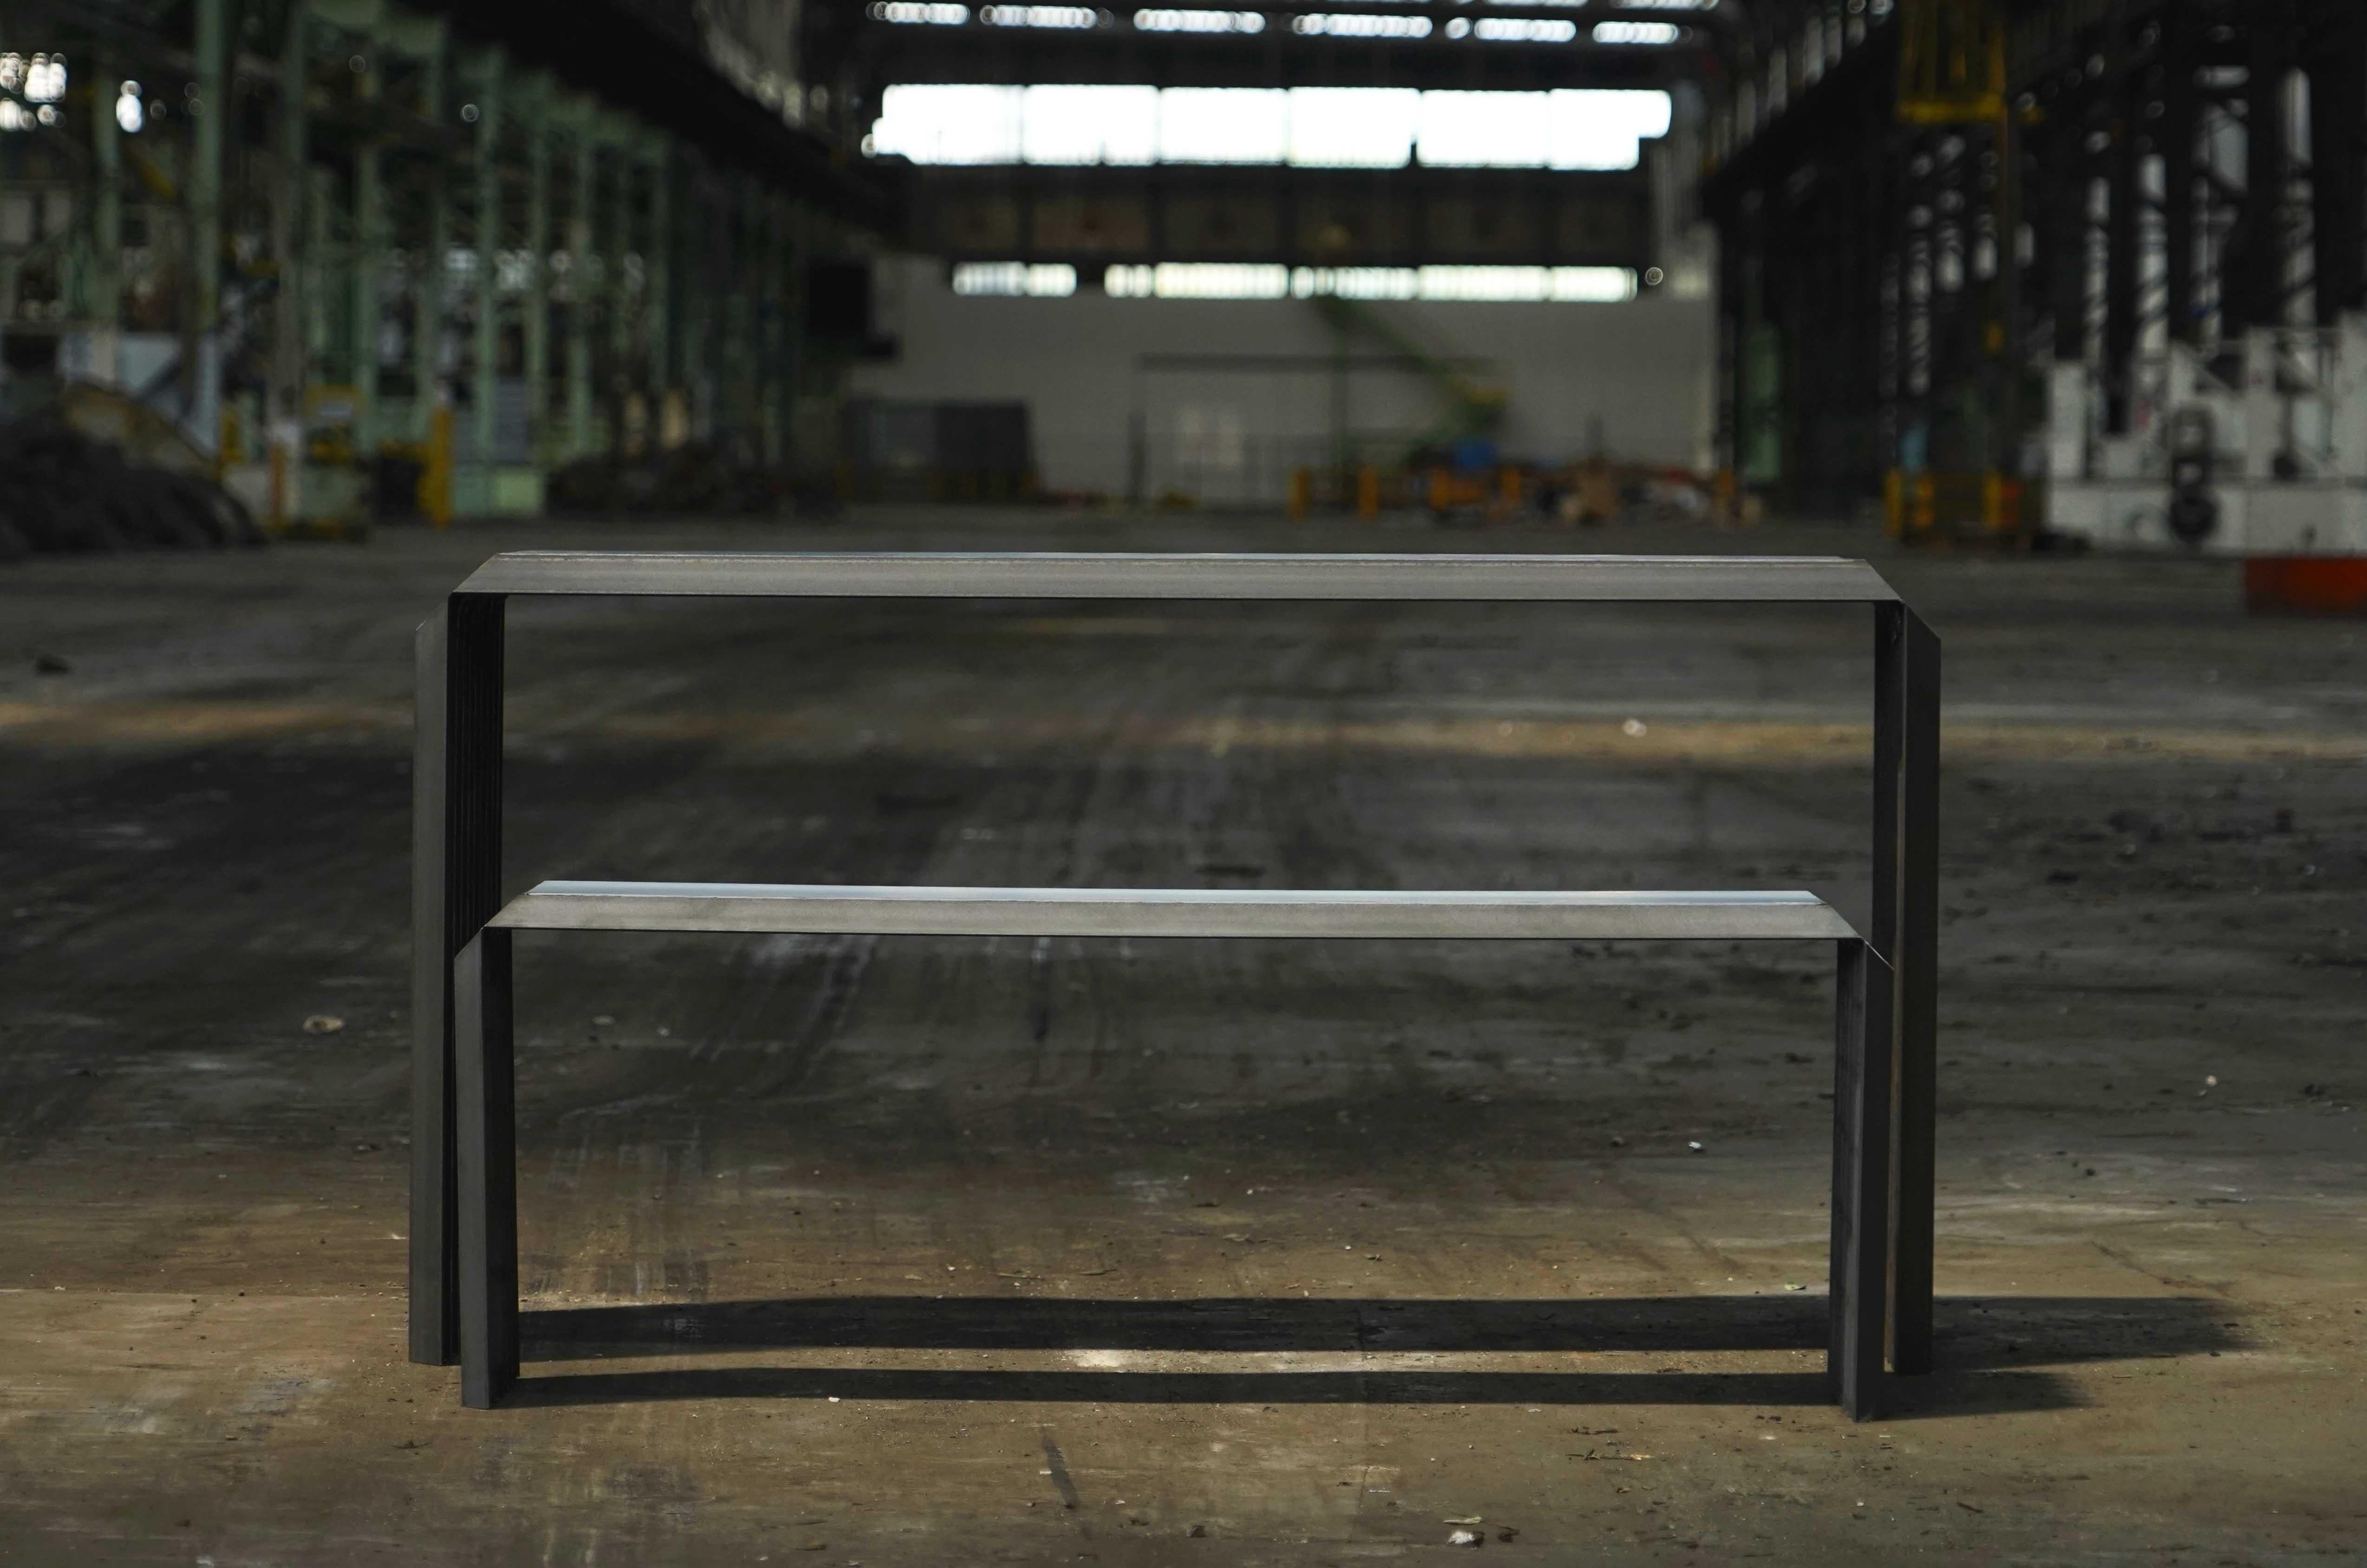 Sculpted steel table and bench by Jules Lobgeois.
Hand-sculpted steel.
Table: L 140 x L 88 x H 55.
Bench: L 120 x L 30 x H 45.

The aim of this new collection is to explore different ways of using metal profiles by interpreting the steel pieces